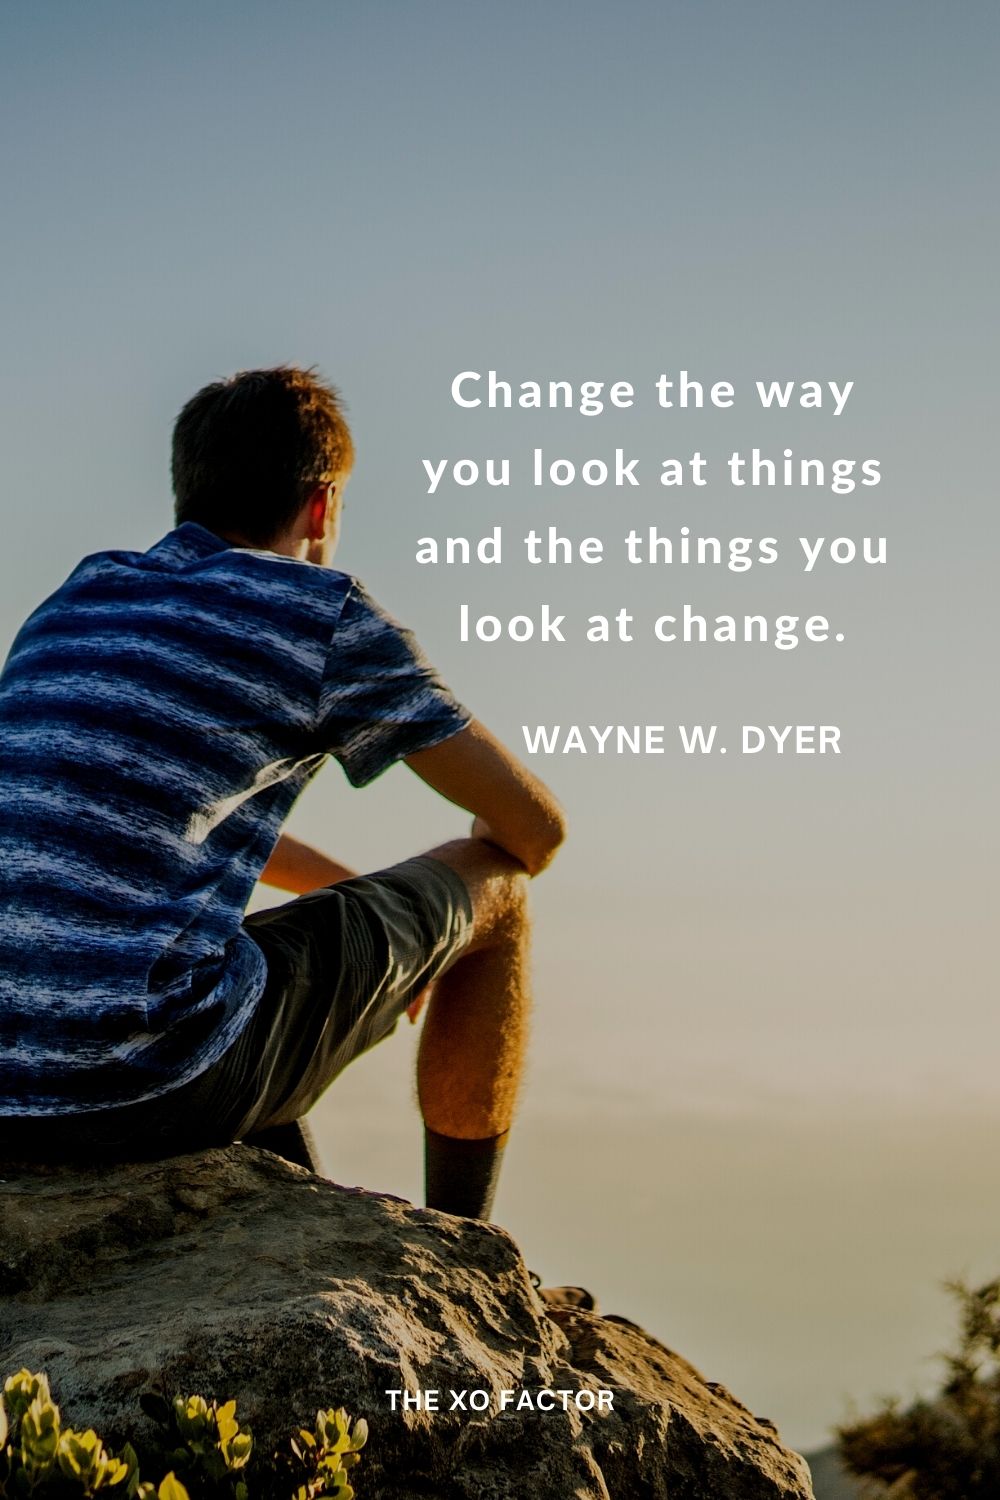 Change the way you look at things and the things you look at change.